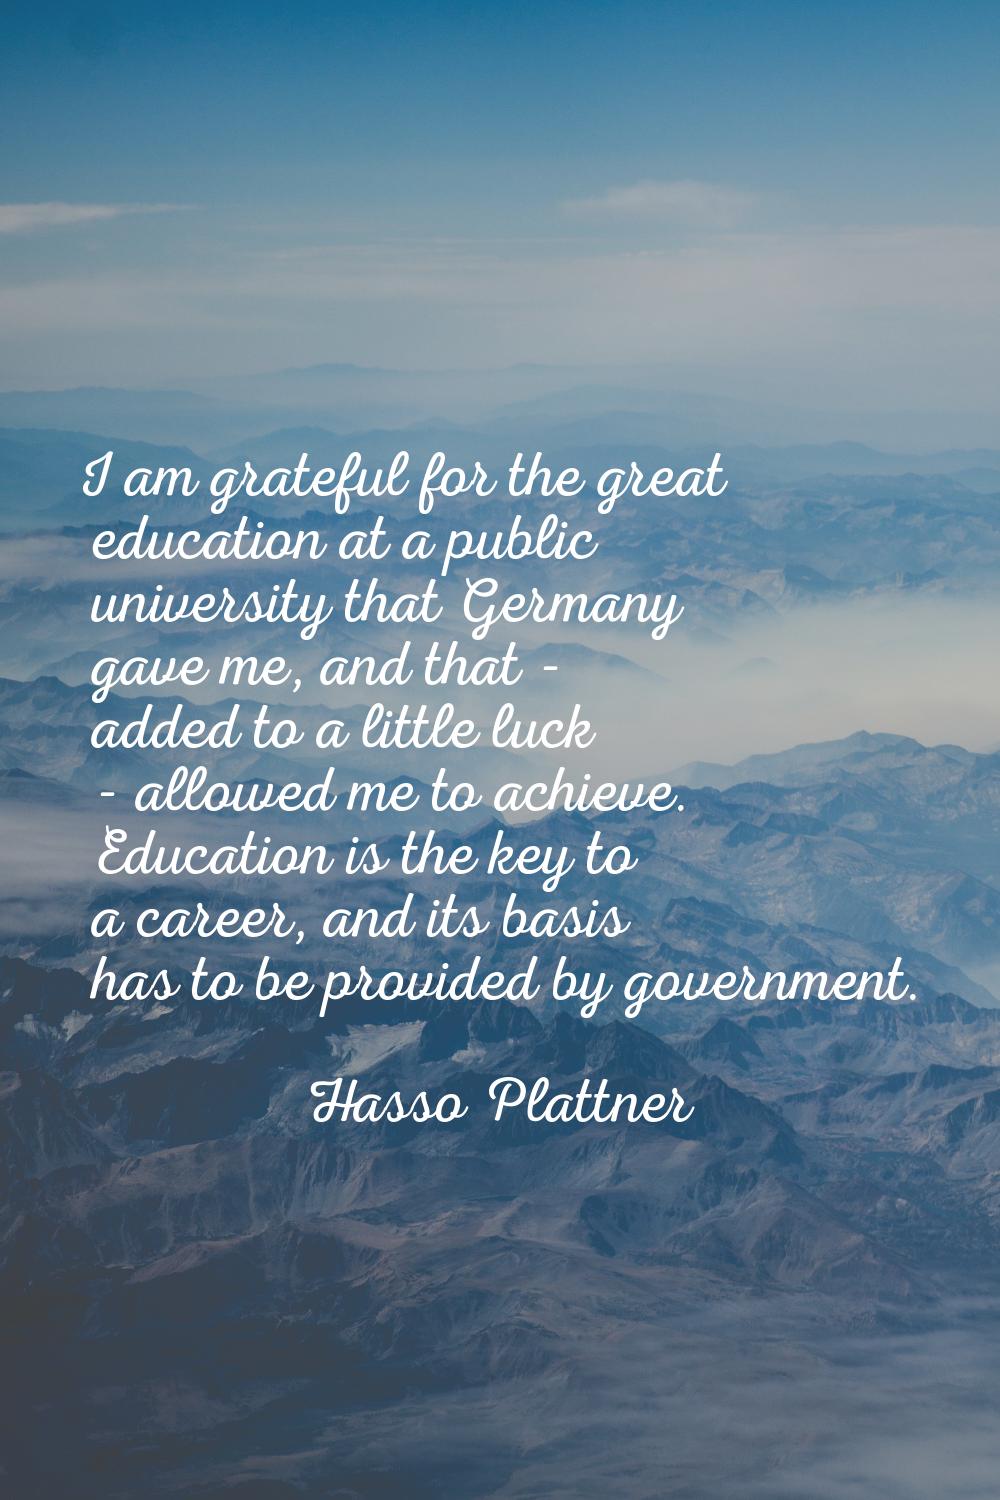 I am grateful for the great education at a public university that Germany gave me, and that - added